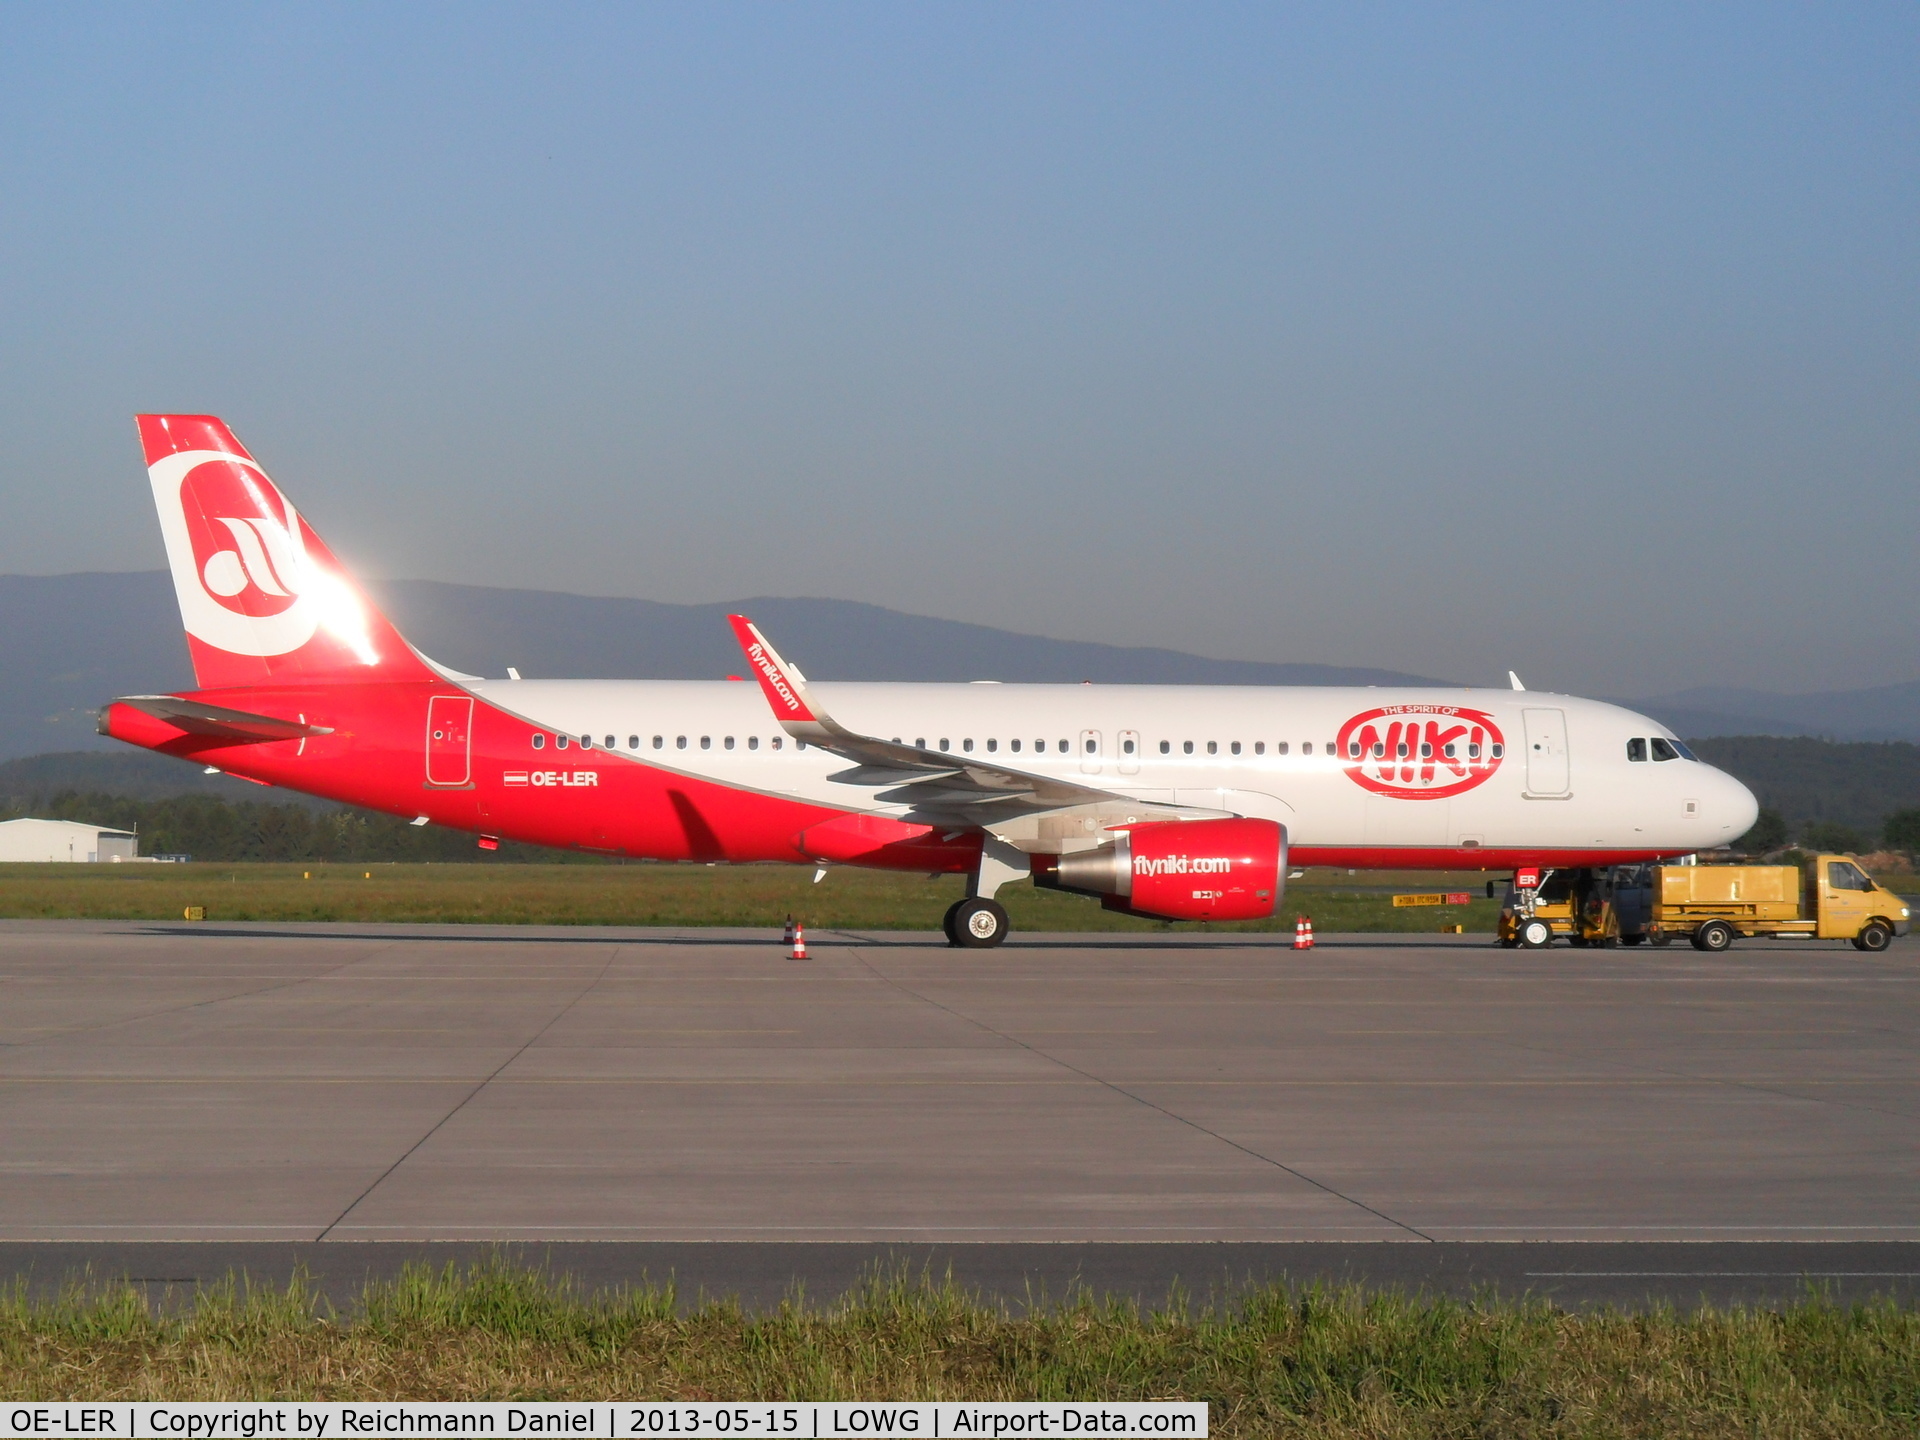 OE-LER, 2013 Airbus A320-214 C/N 5522, Newest member of the Niki fleet, nice to see this beauty with the brand new sharklets :))